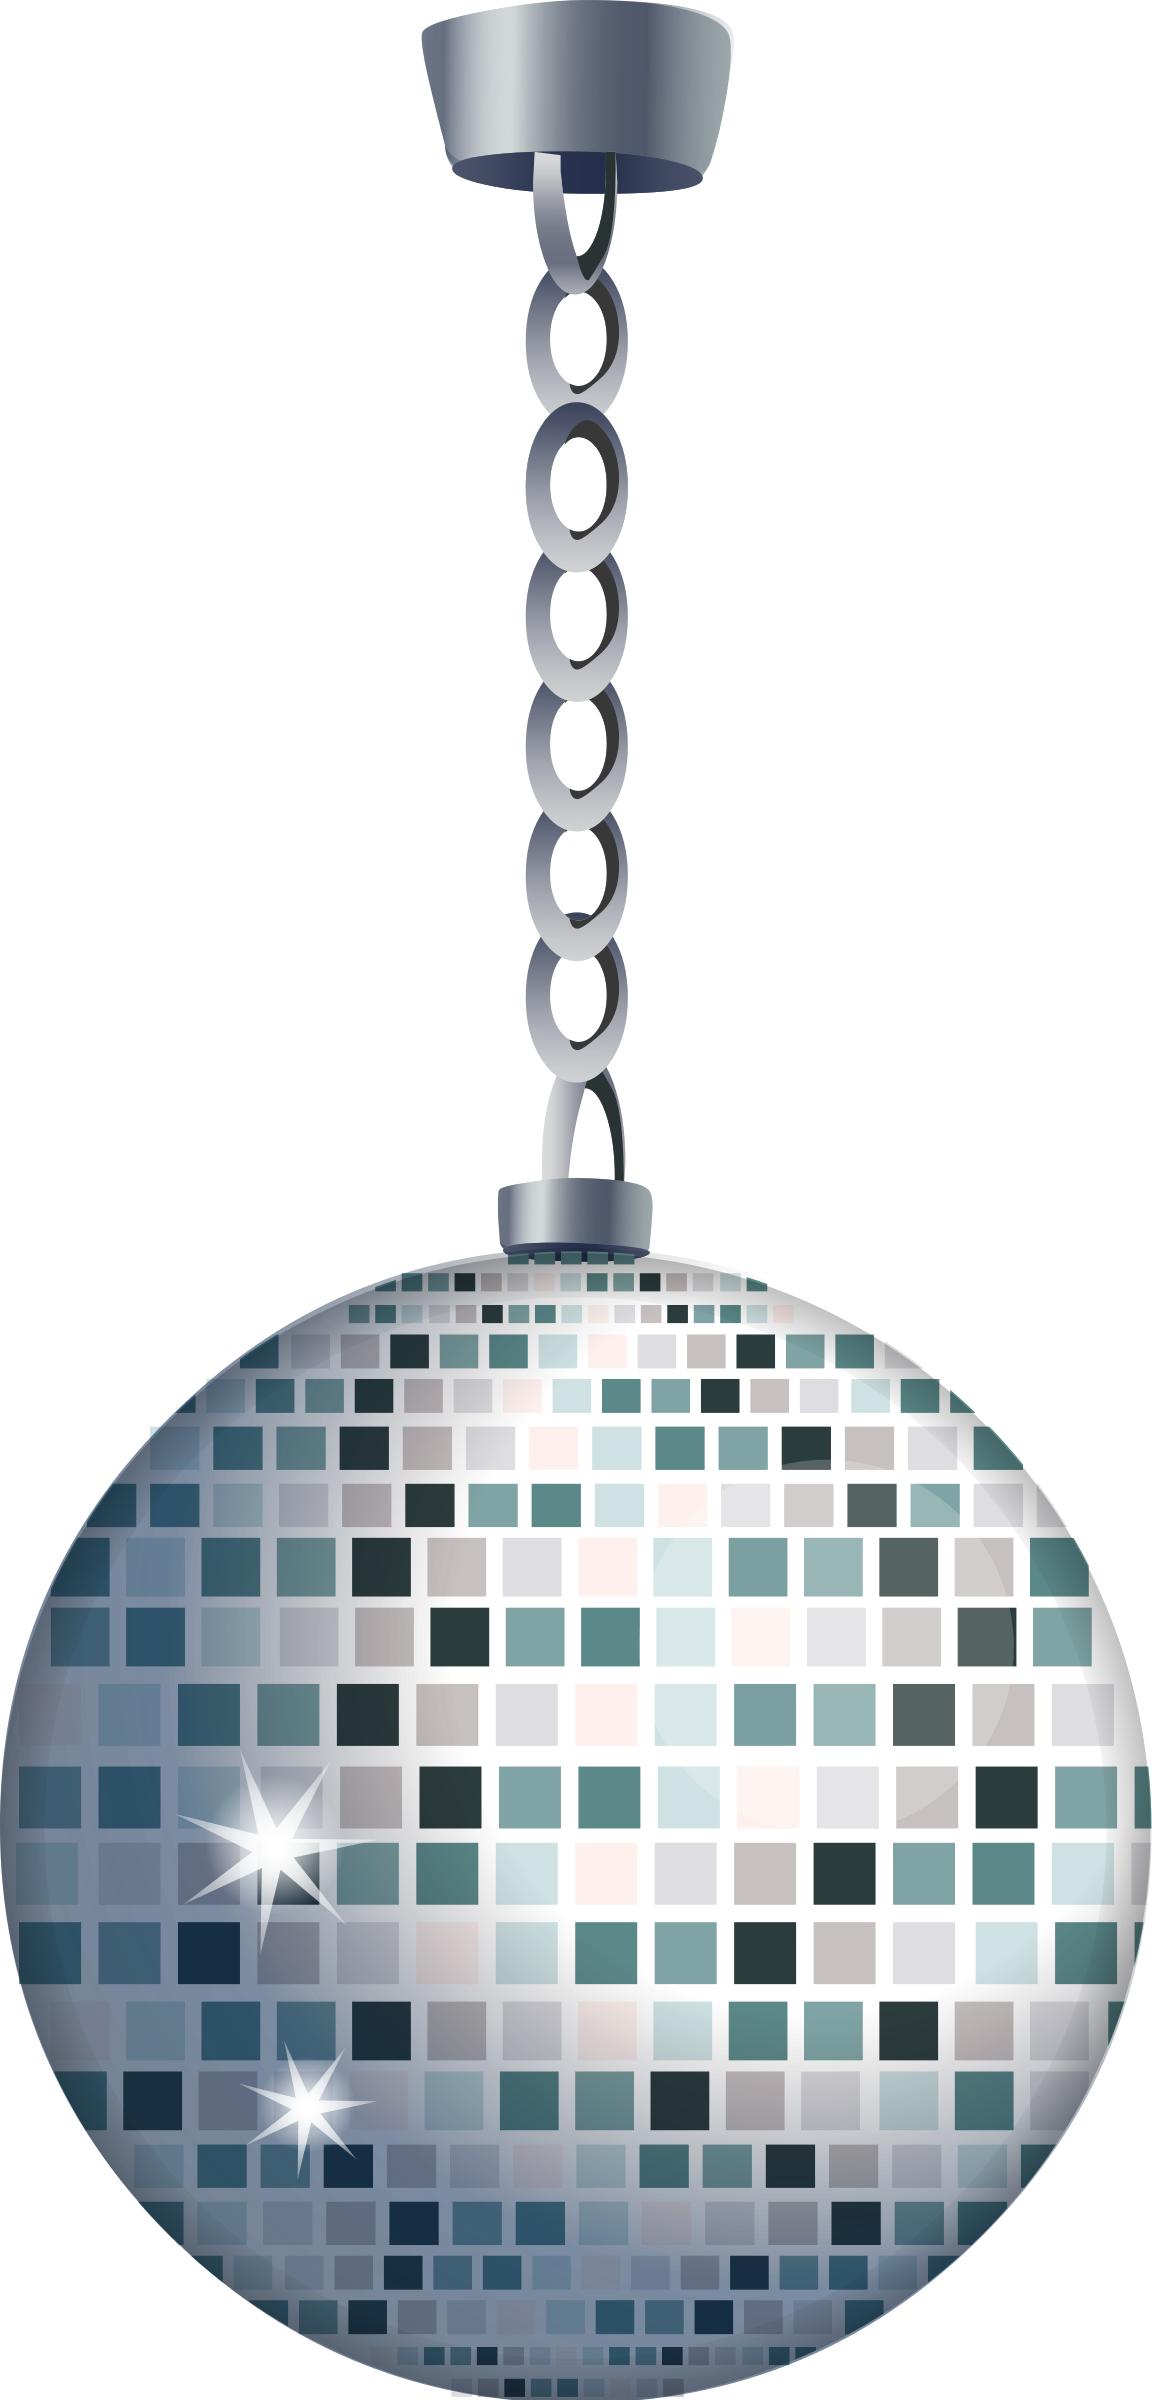 Glitter ball from Glitch png